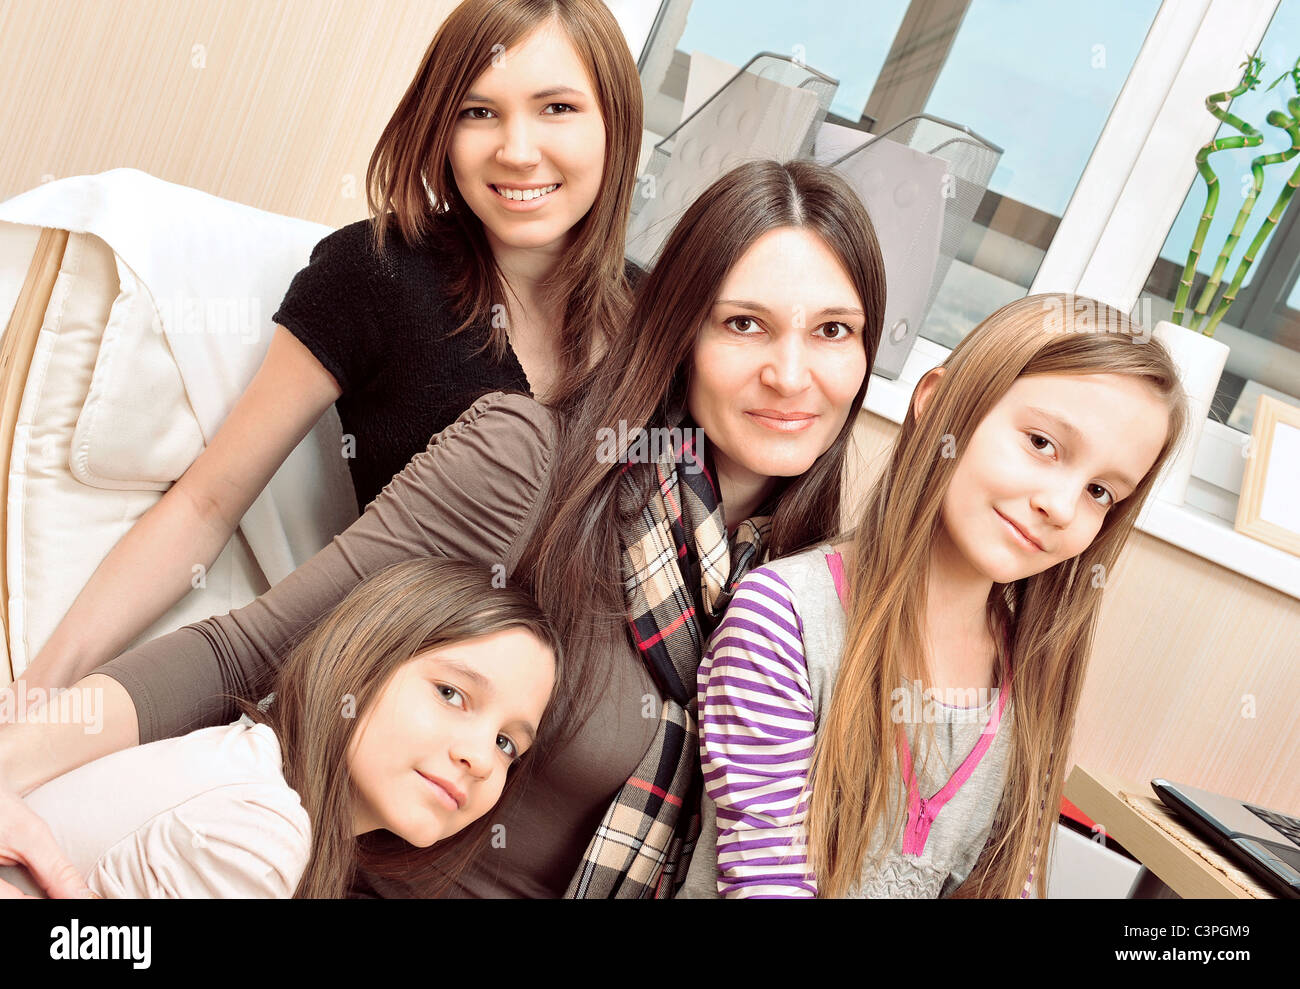 Portrait of happy family of only girls having fun together at their  apartment Stock Photo - Alamy